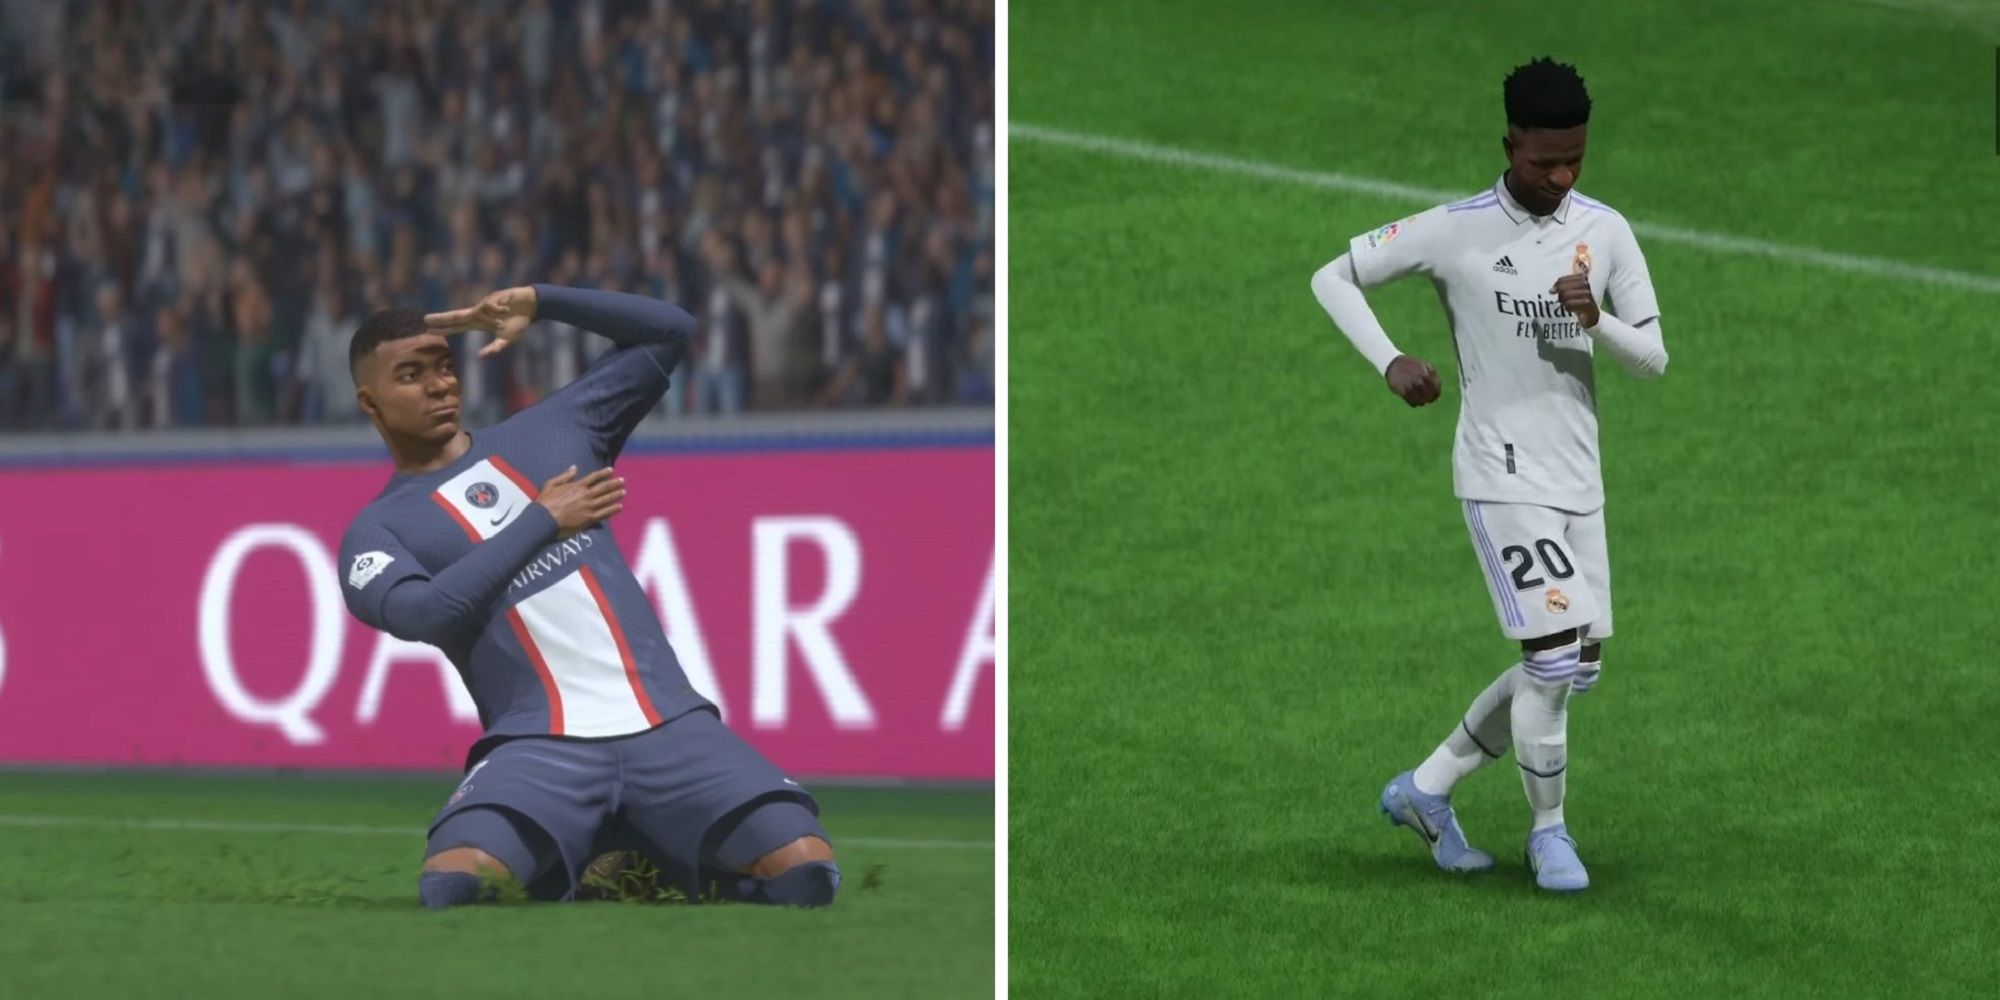 FIFA 23 Career Mode Hidden Gems and Fastest Players Revealed, Full Player  Ratings Database Out Now